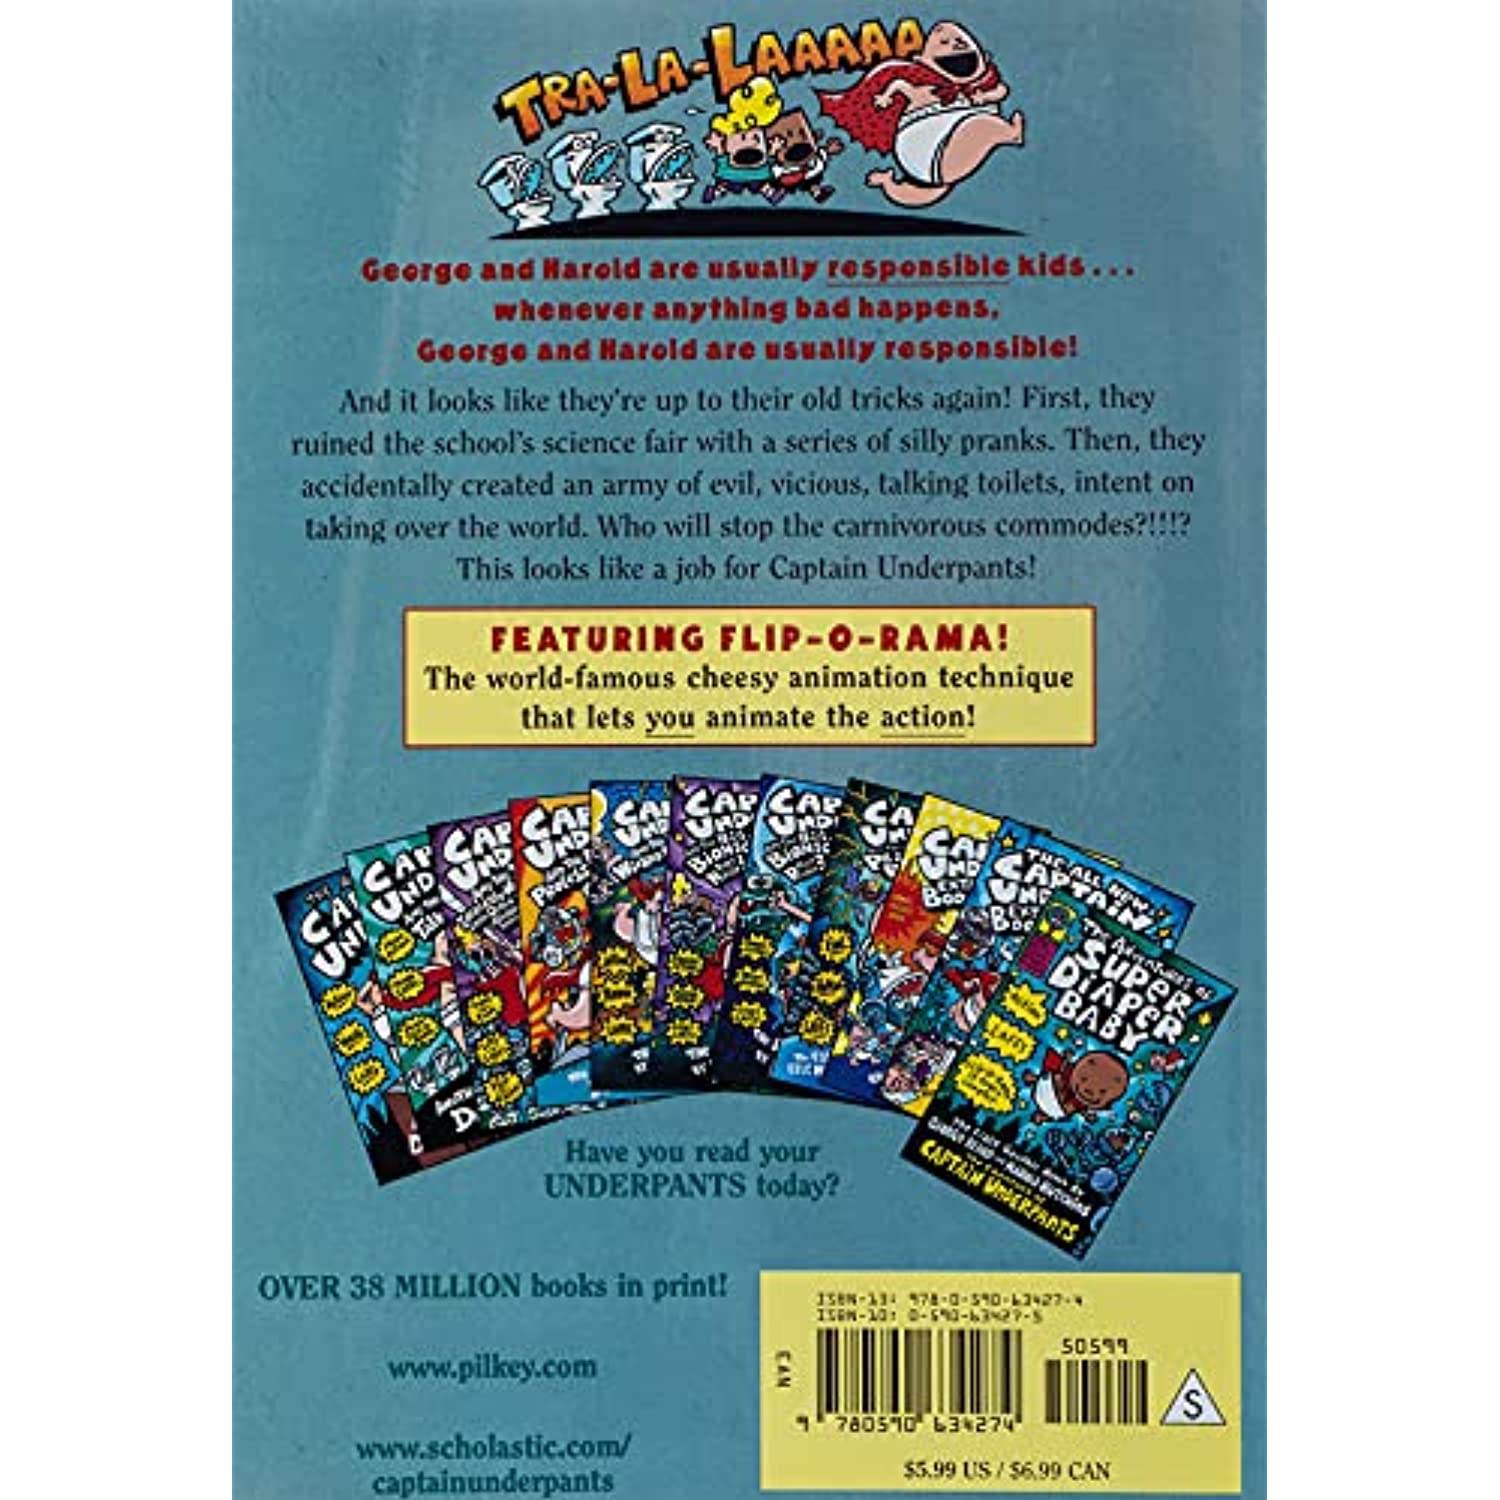 Captain Underpants and the Attack of the Talking Toilets (Captain Underpants #2) (Paperback) - image 2 of 3